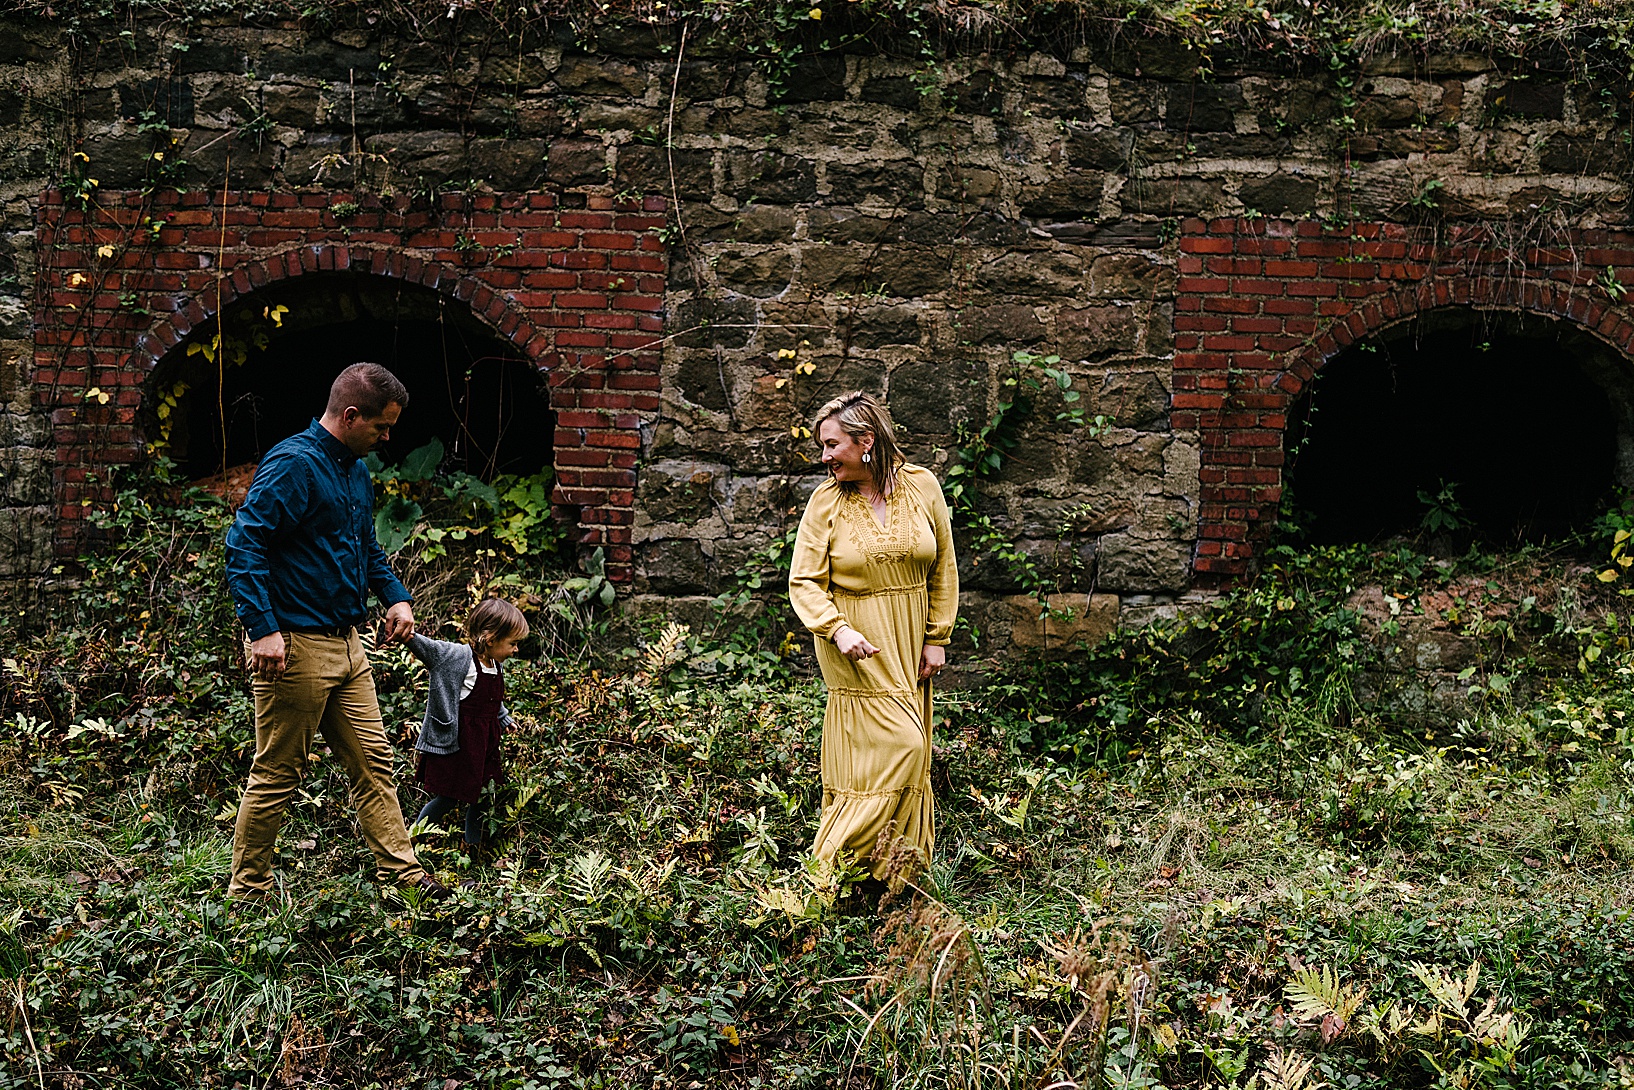 Blonde woman in mustard colored dress walks looking back at her daughter and husband holding hands walking behind her while in front of a gorgeous stone and brick wall at Leetonia Coke Ovens.